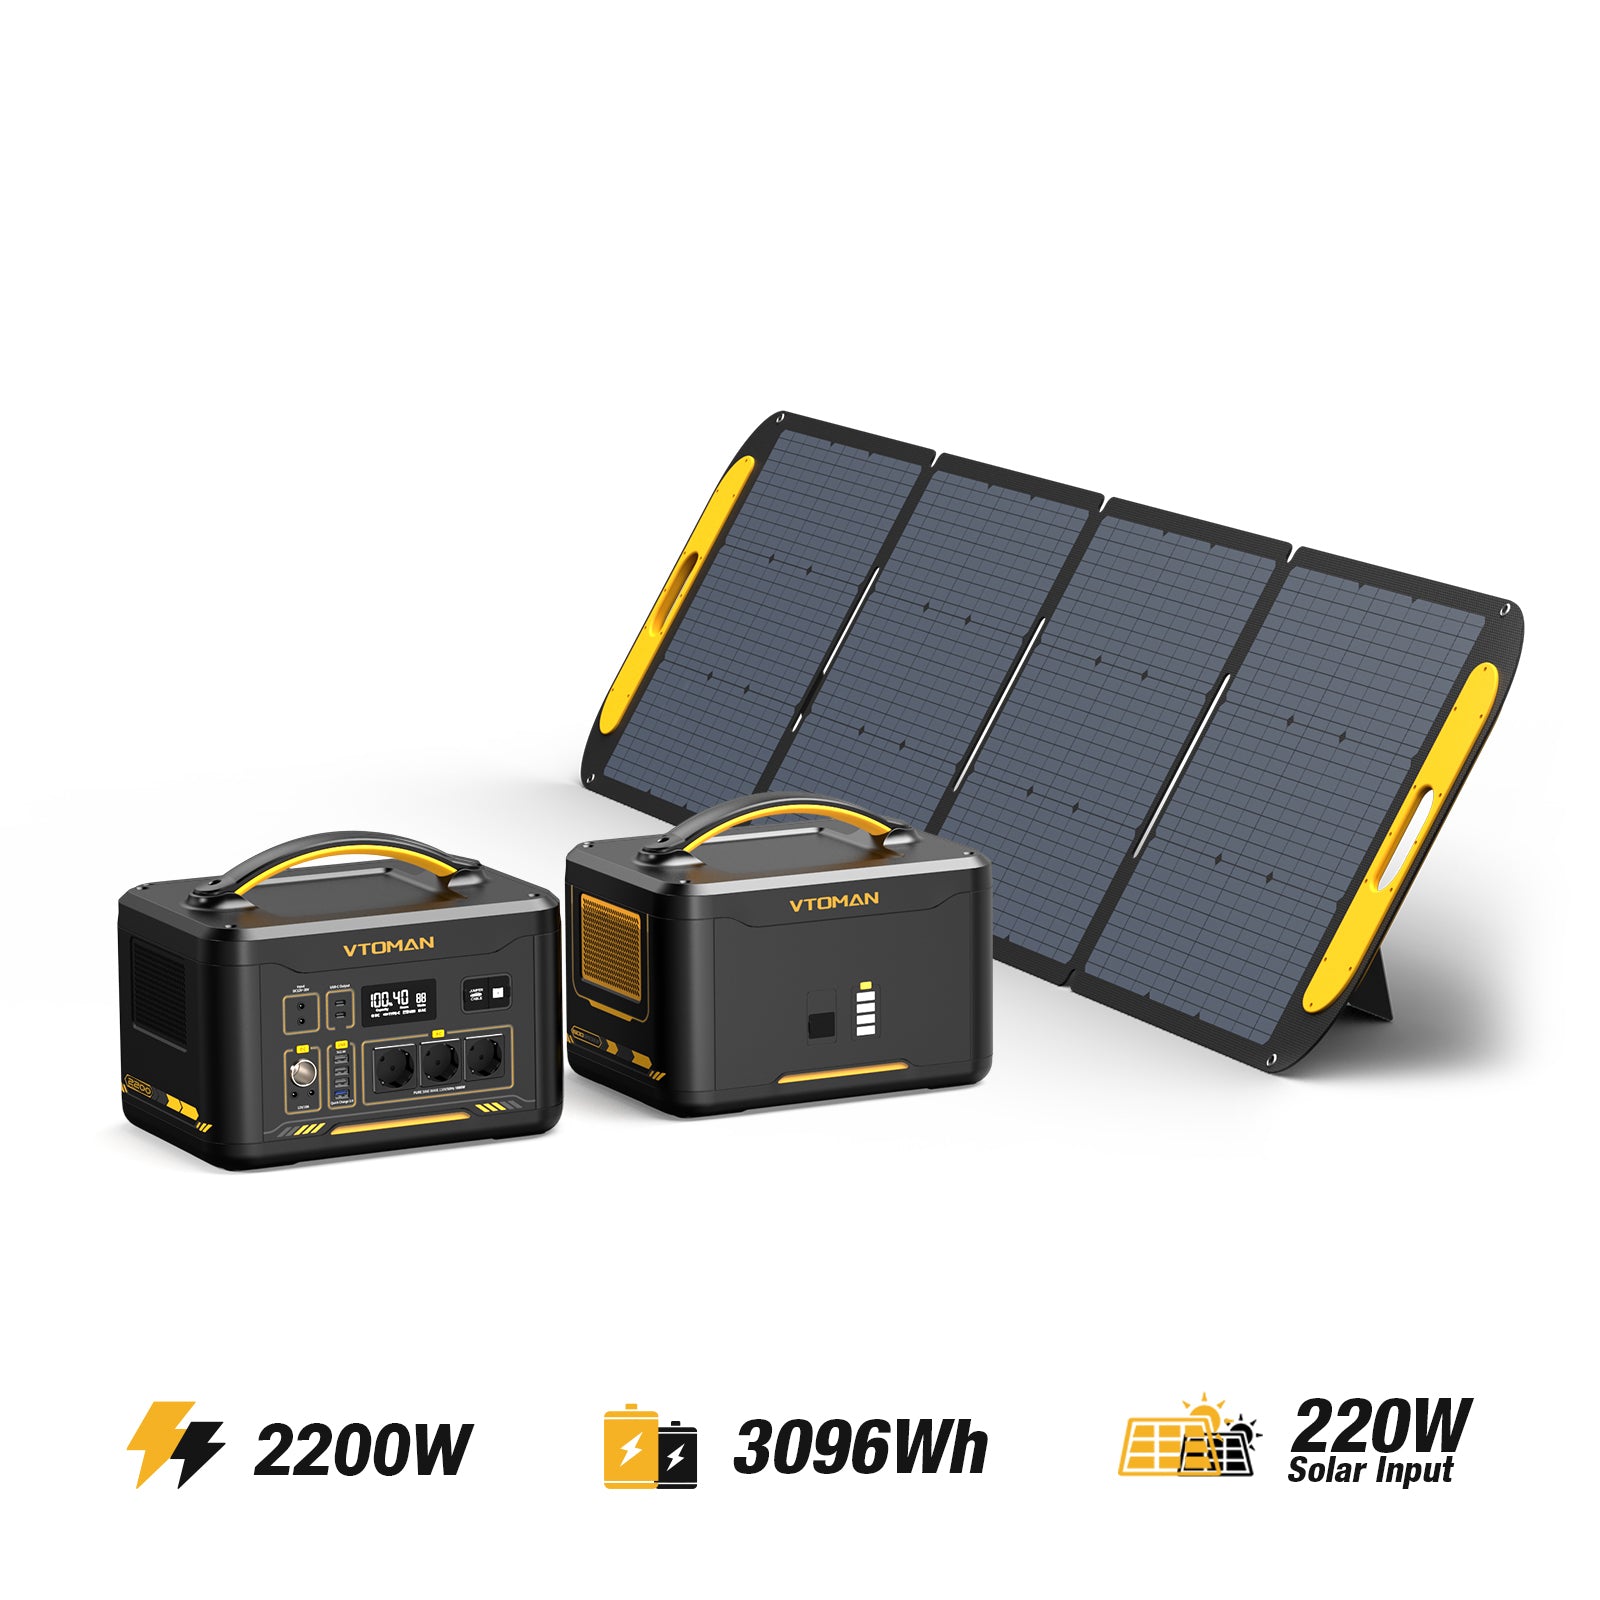 Jump 2200W/3096Wh 220W Solargenerator